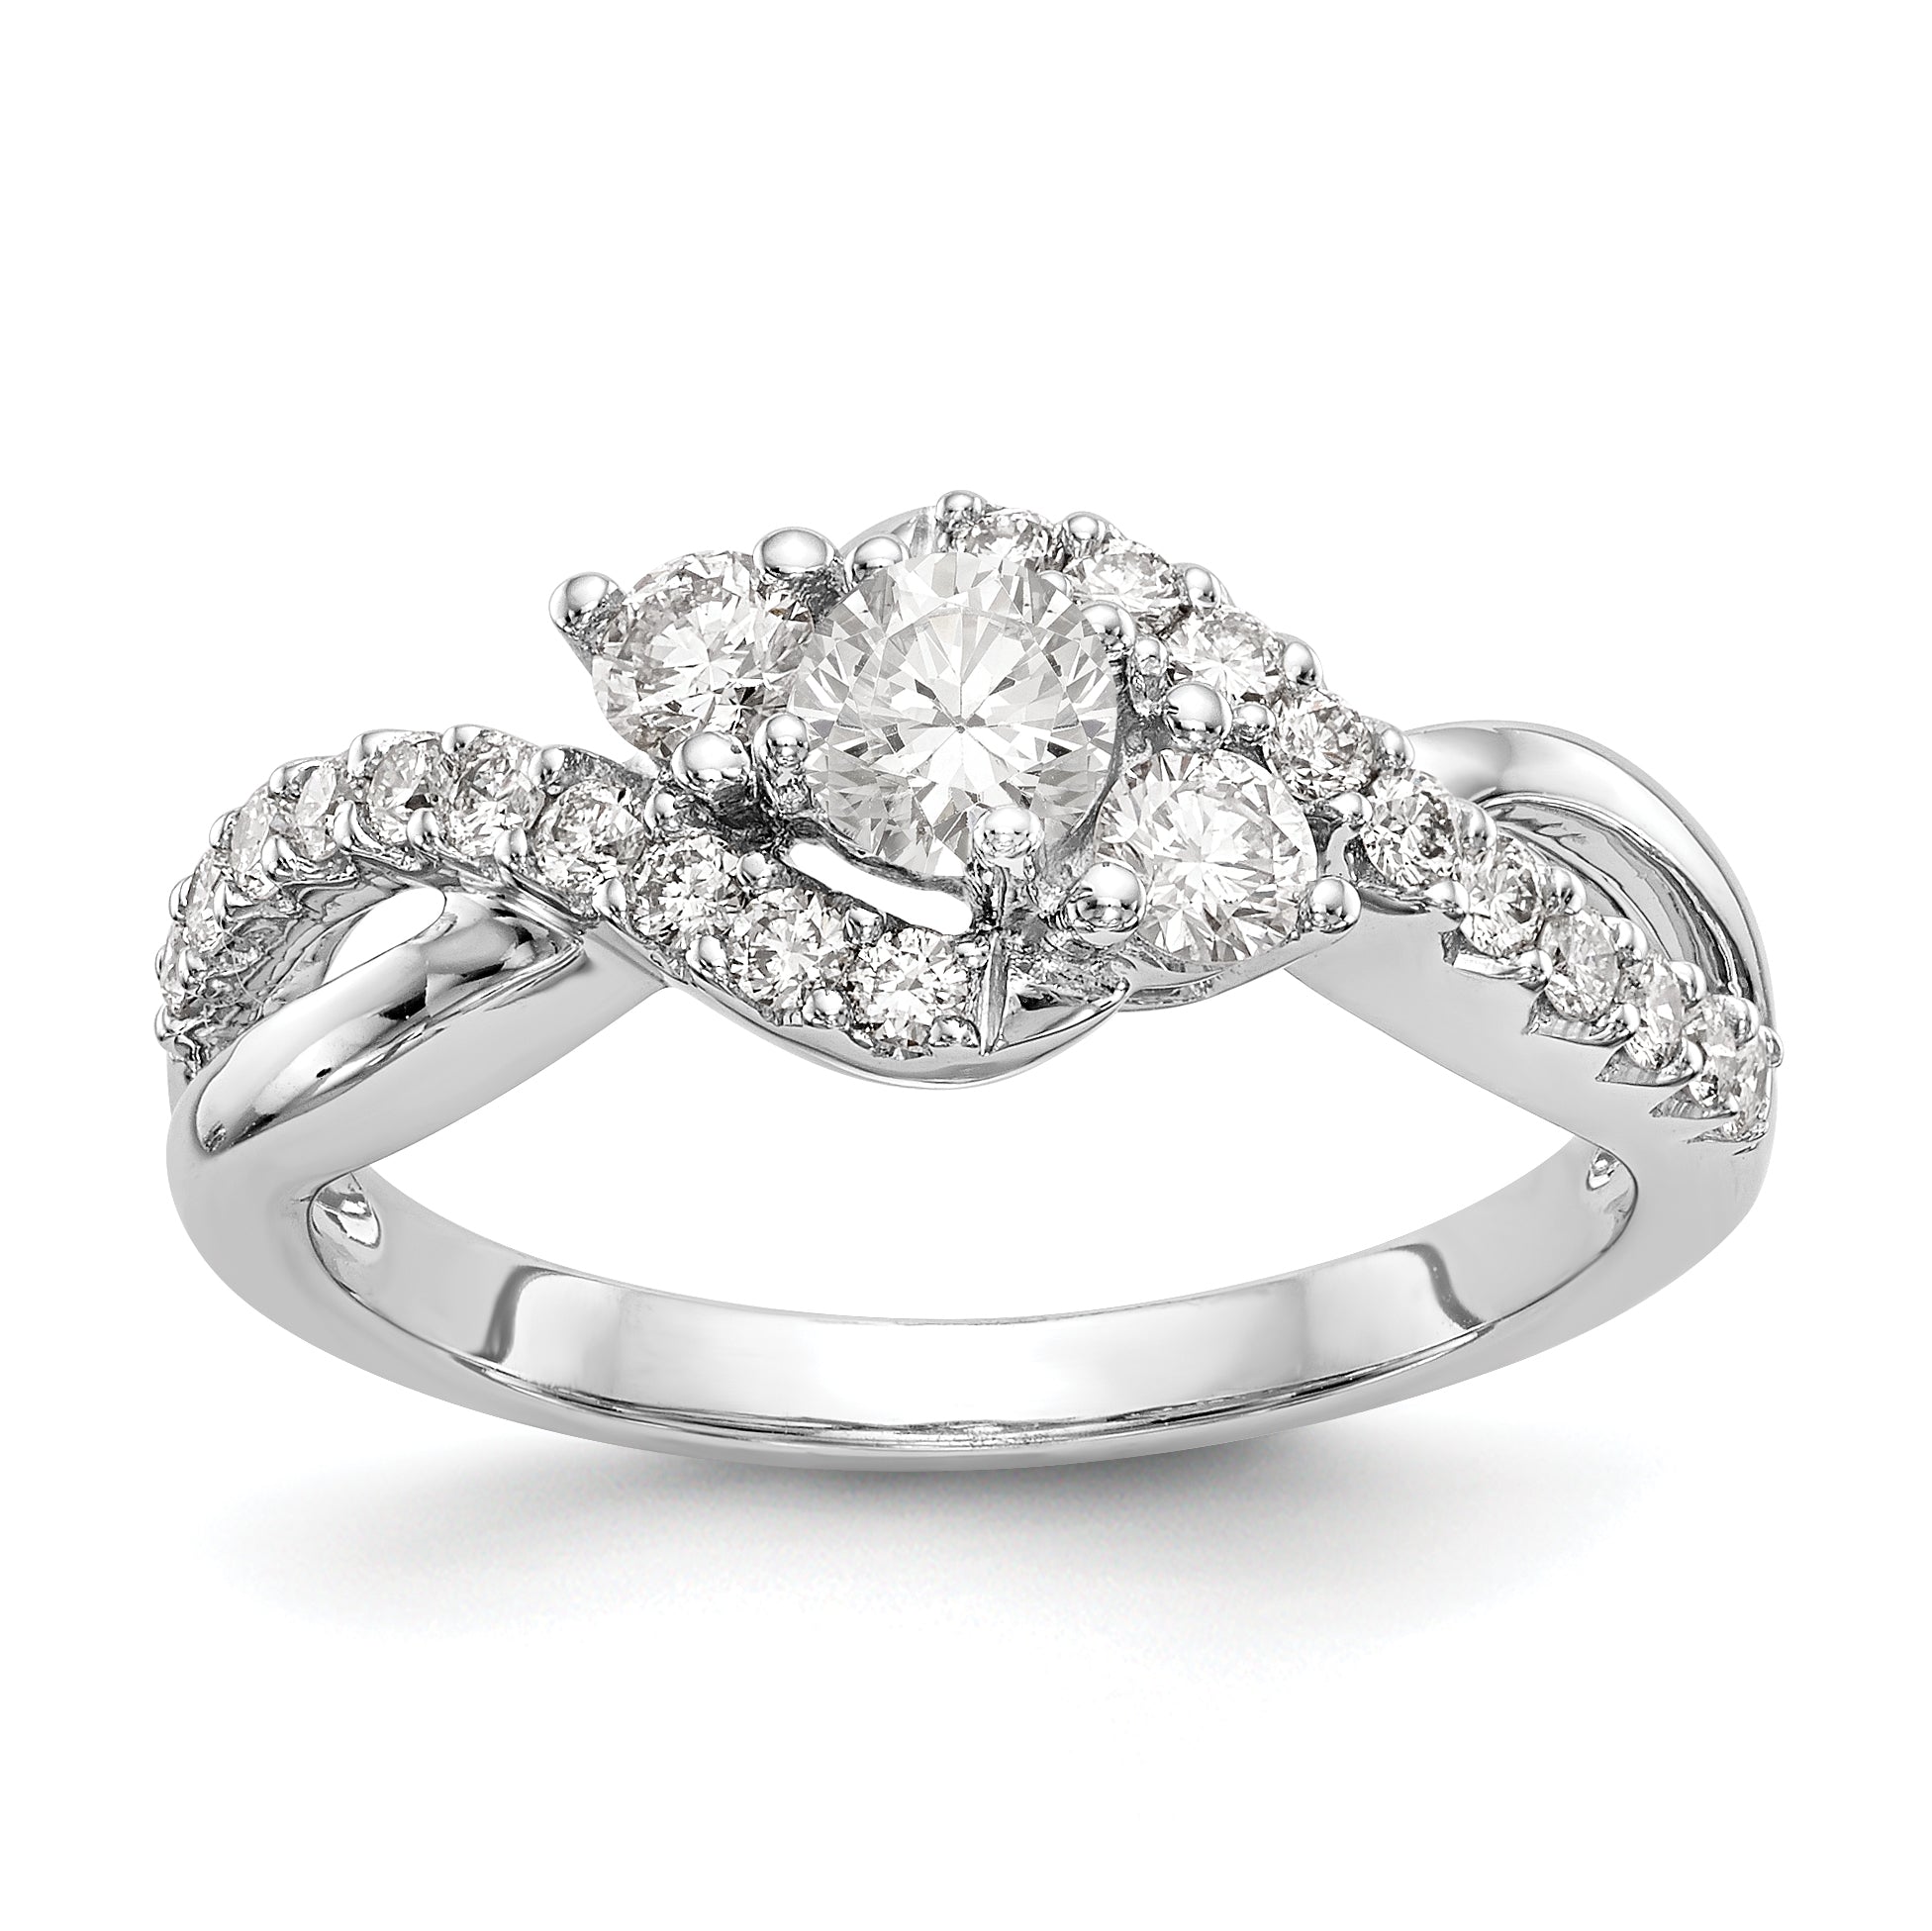 Image of ID 1 14k White Gold Simulated Diamond Criss Cross Engagement Ring